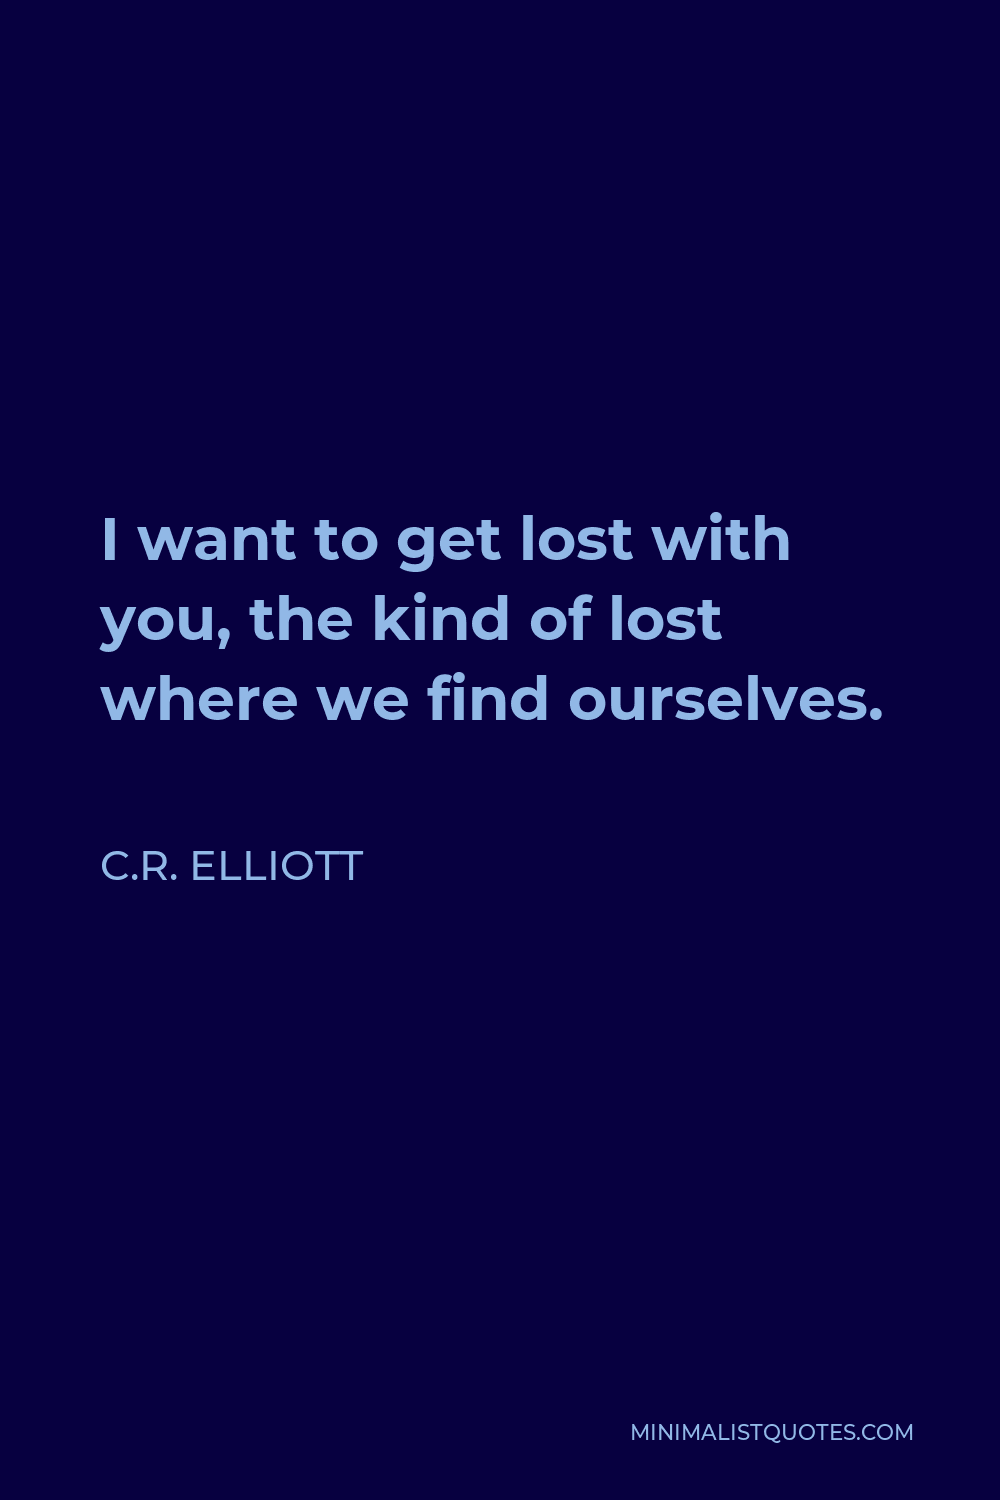 C.R. Elliott Quote - I want to get lost with you, the kind of lost where we find ourselves.